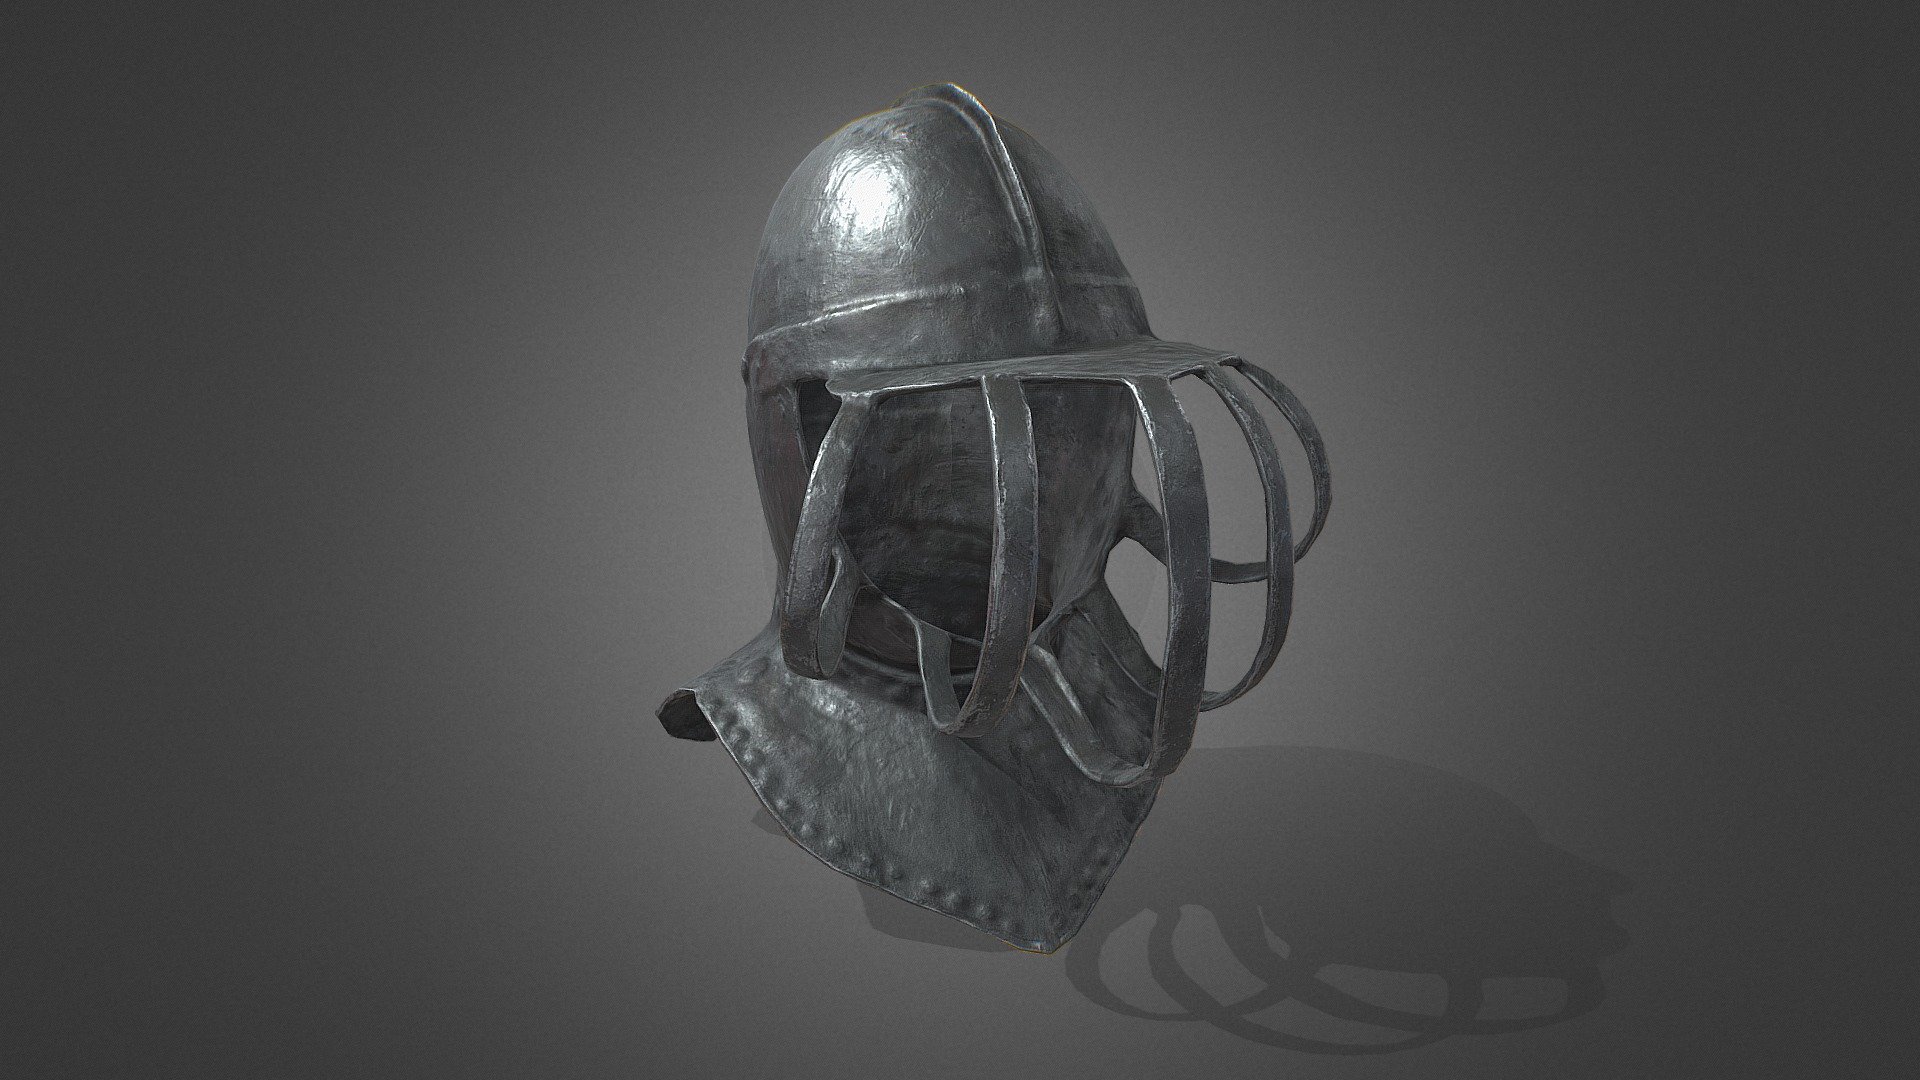 Low Poly Saxilby Memorial Helmet




HighPoly Model:bit.ly/3qJfSsF

4096x4096 Pixel PNG Texture.

PBR:BaseColor, Ambient Oclusion, Metalness, Roughness and Normalmap.

Retopology and UV:Blender.

Texturing:SubstancePainter.

Source 3D Model Website:threedscans.com/lincoln/helmet
 - Low Poly Saxilby Memorial Helmet - Download Free 3D model by Arthur.Zim 3d model